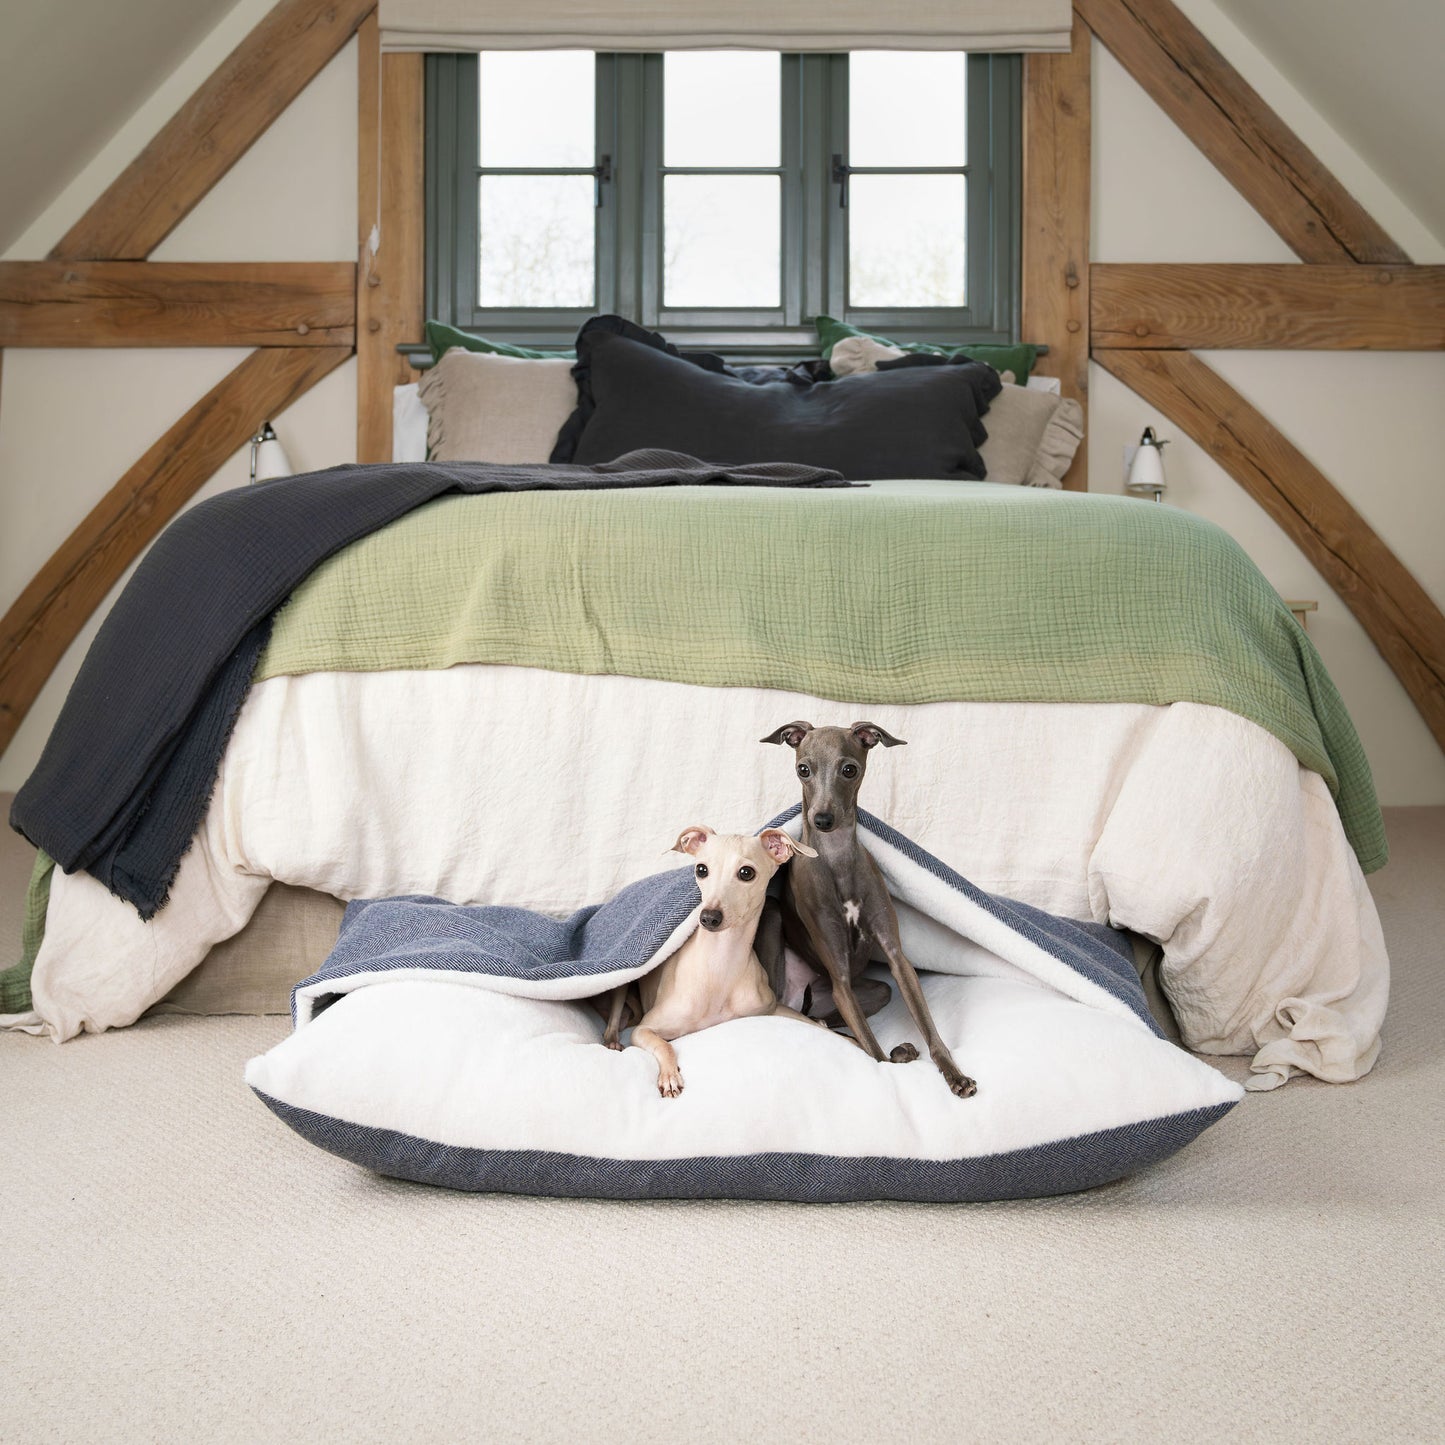 Discover The Perfect Burrow For Your Pet, Our Stunning Sleepy Burrow Dog Beds In Oxford Herringbone Is The Perfect Bed Choice For Your Pet, Available Now at Lords & Labradors US